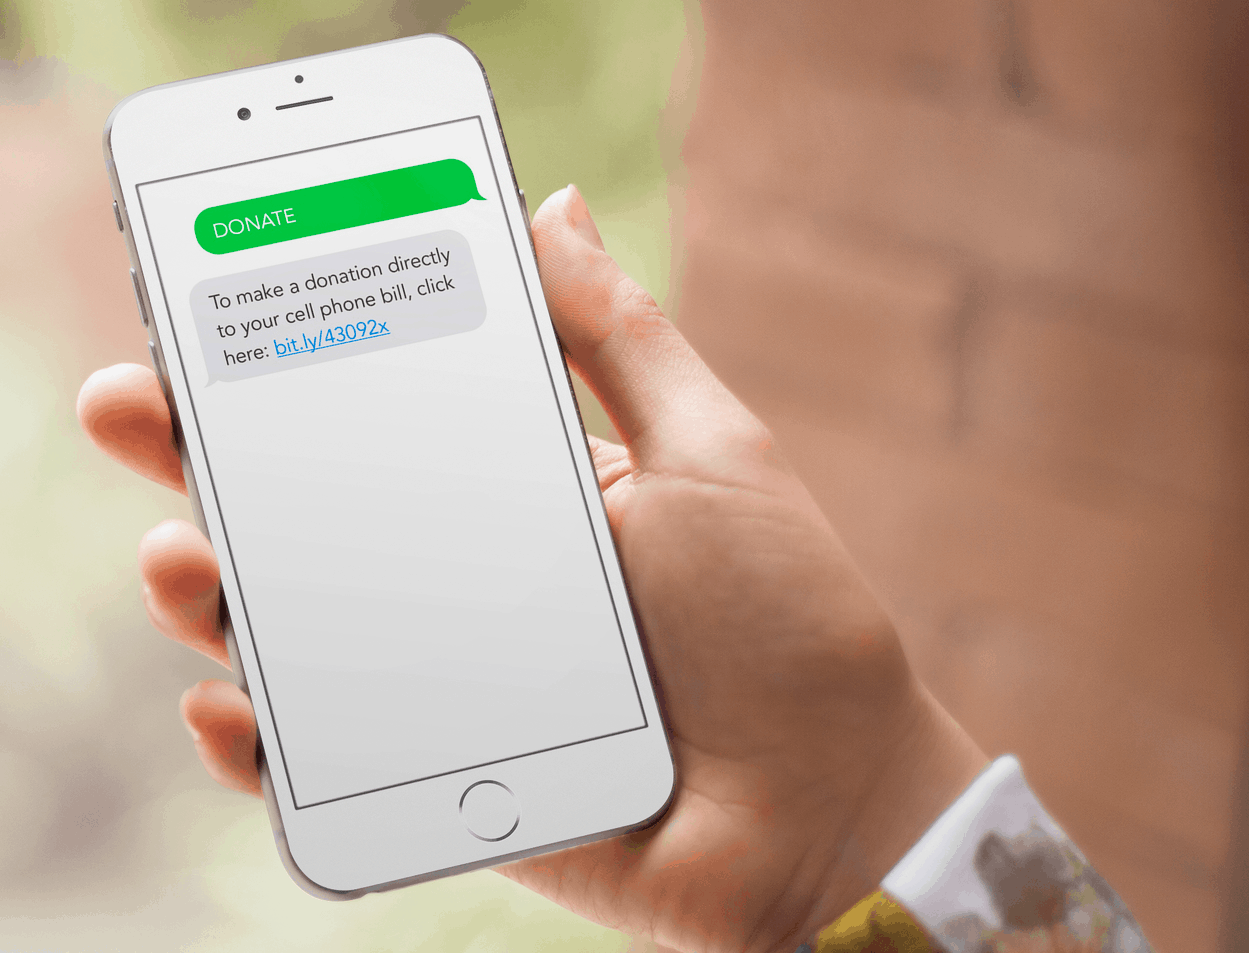 SMS Marketing for Mobile Donations